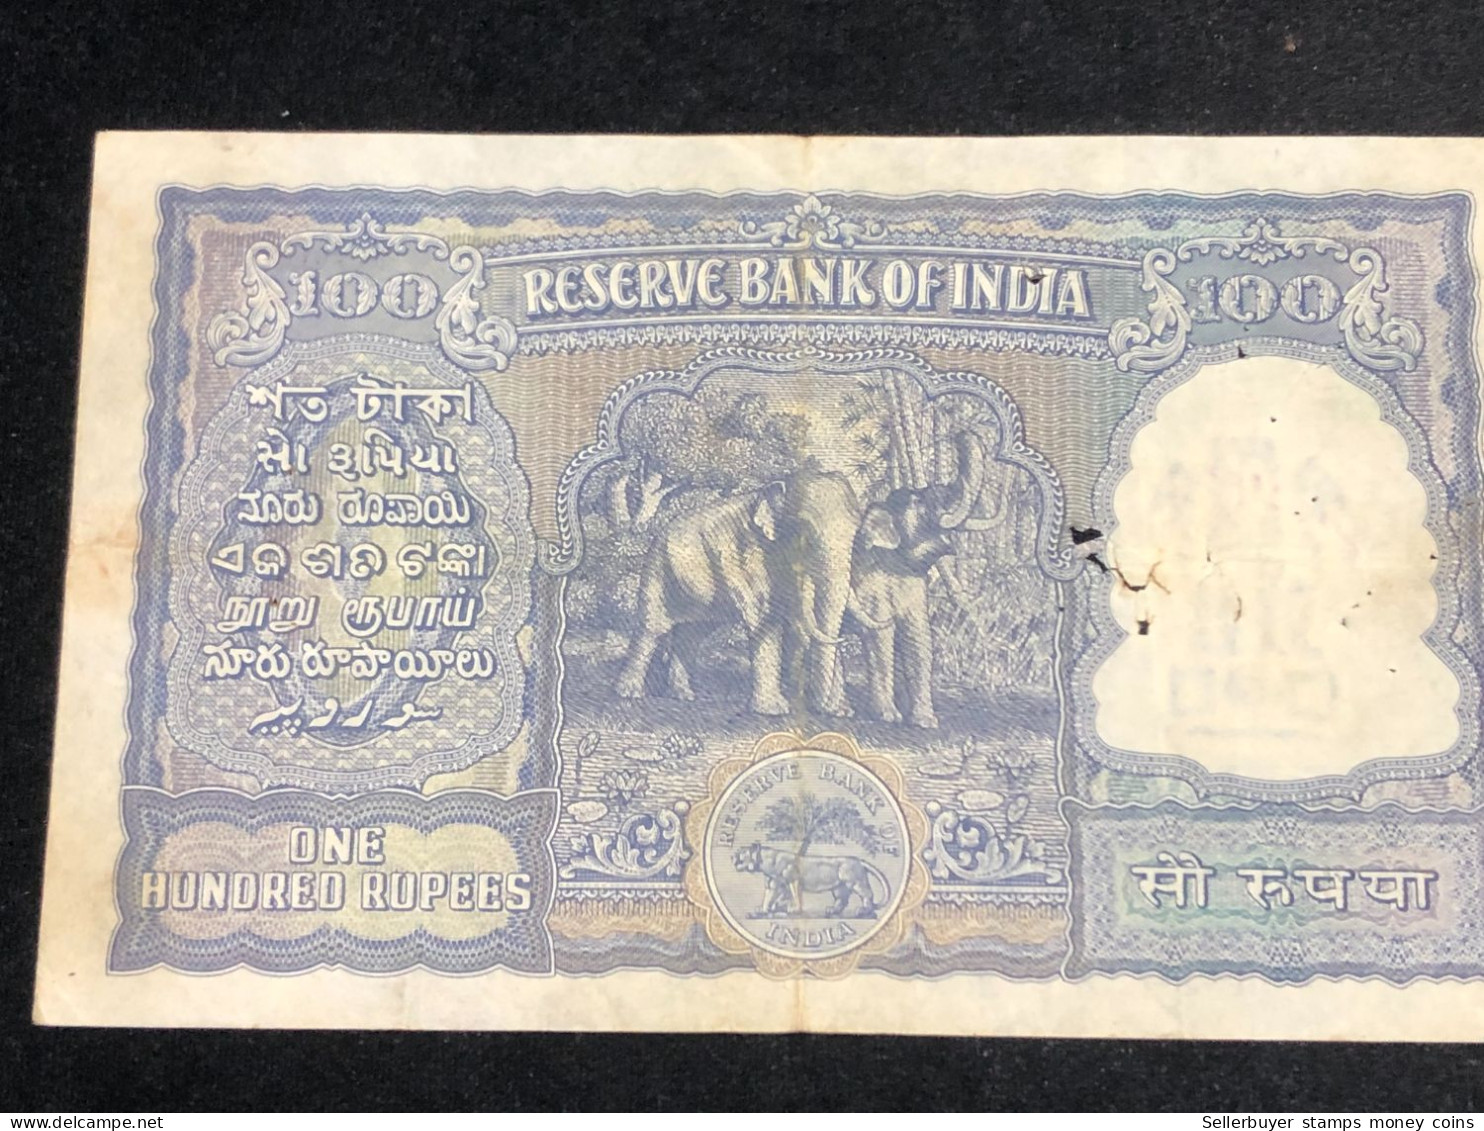 INDIA 100 RUPEES P-43  1957 TIGER ELEPHANT DAM MONEY BILL Rhas pinhole ARE BANK NOTE Black numbers above and below 1 pcs